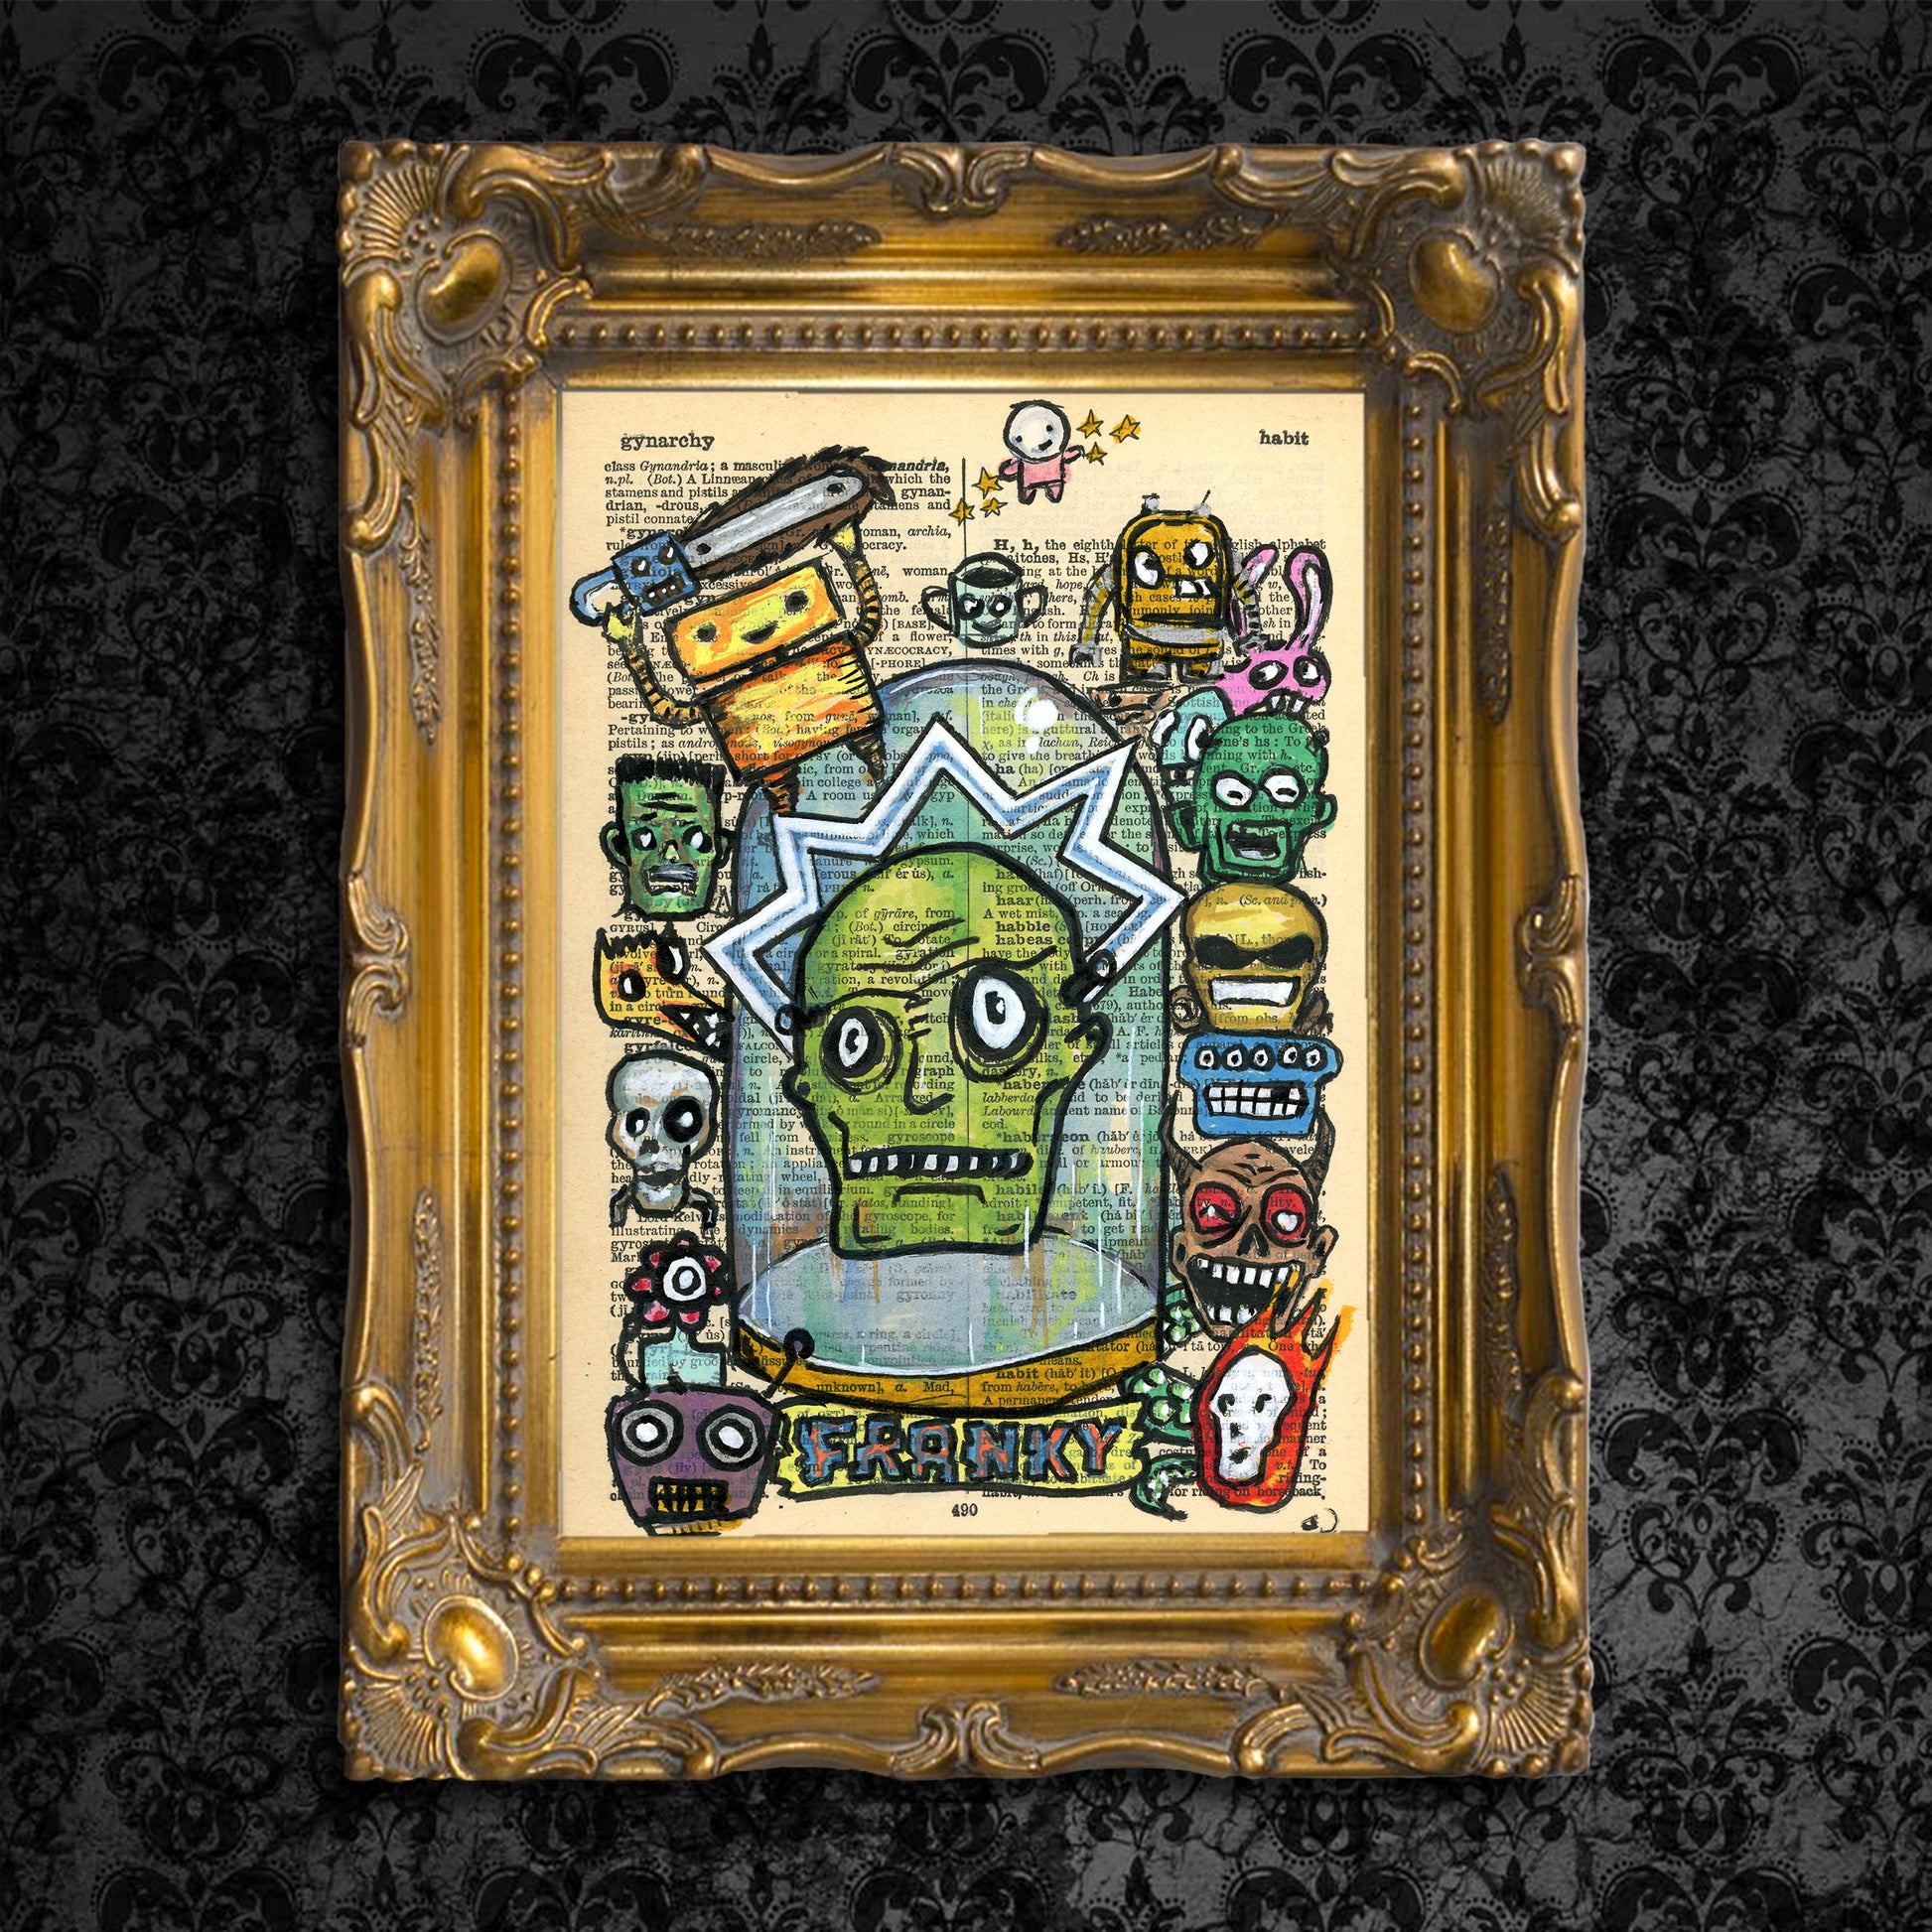 "Franky" art piece featuring a green head in a jar with an electrical discharge, surrounded by cartoon creatures.